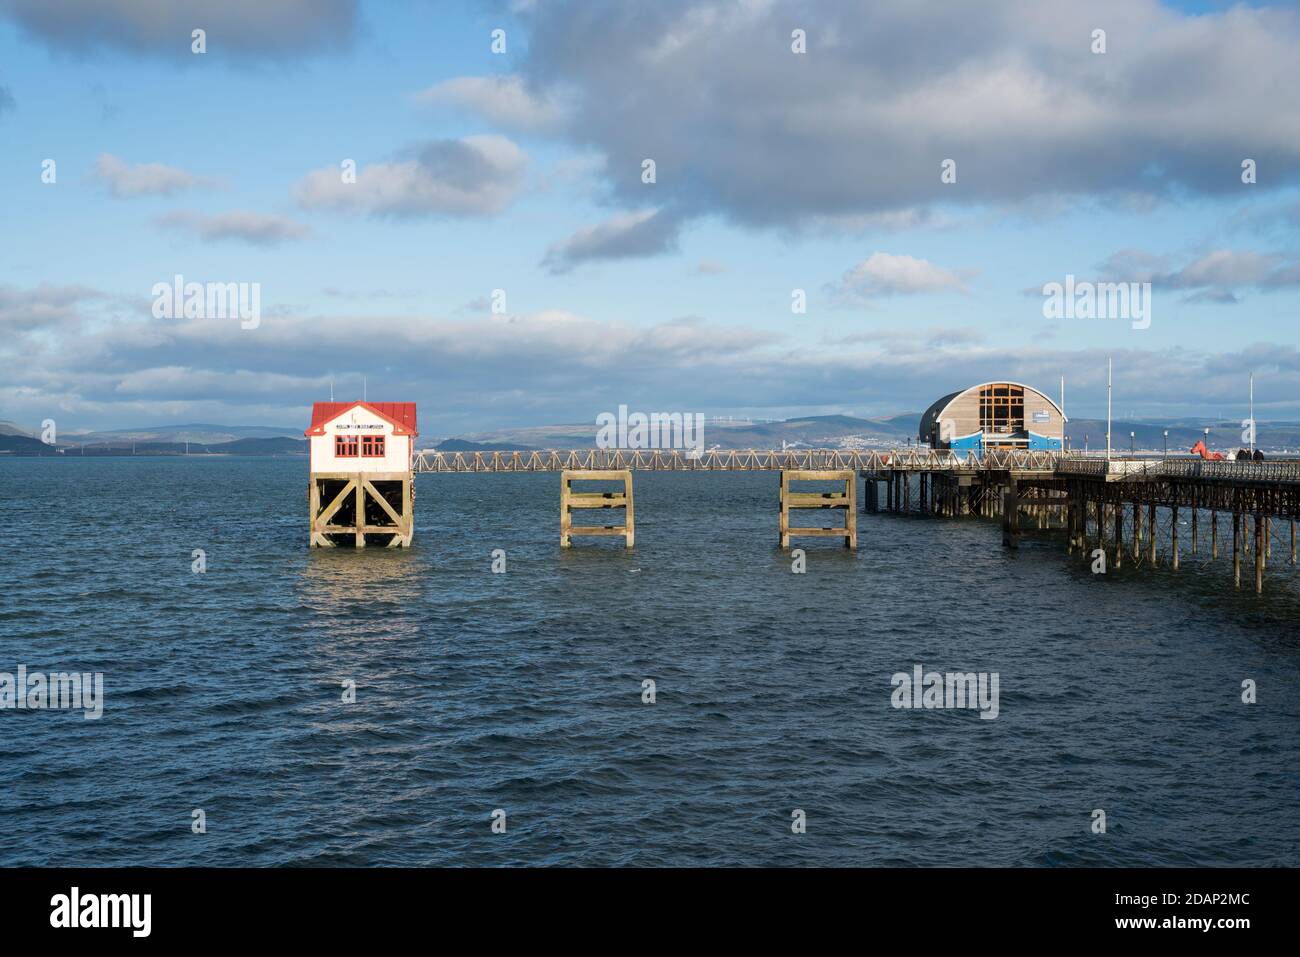 The pier with the old and new lifeboat stations, The Mumbles, Gower Peninsula, near Swansea, South Wales, UK Stock Photo